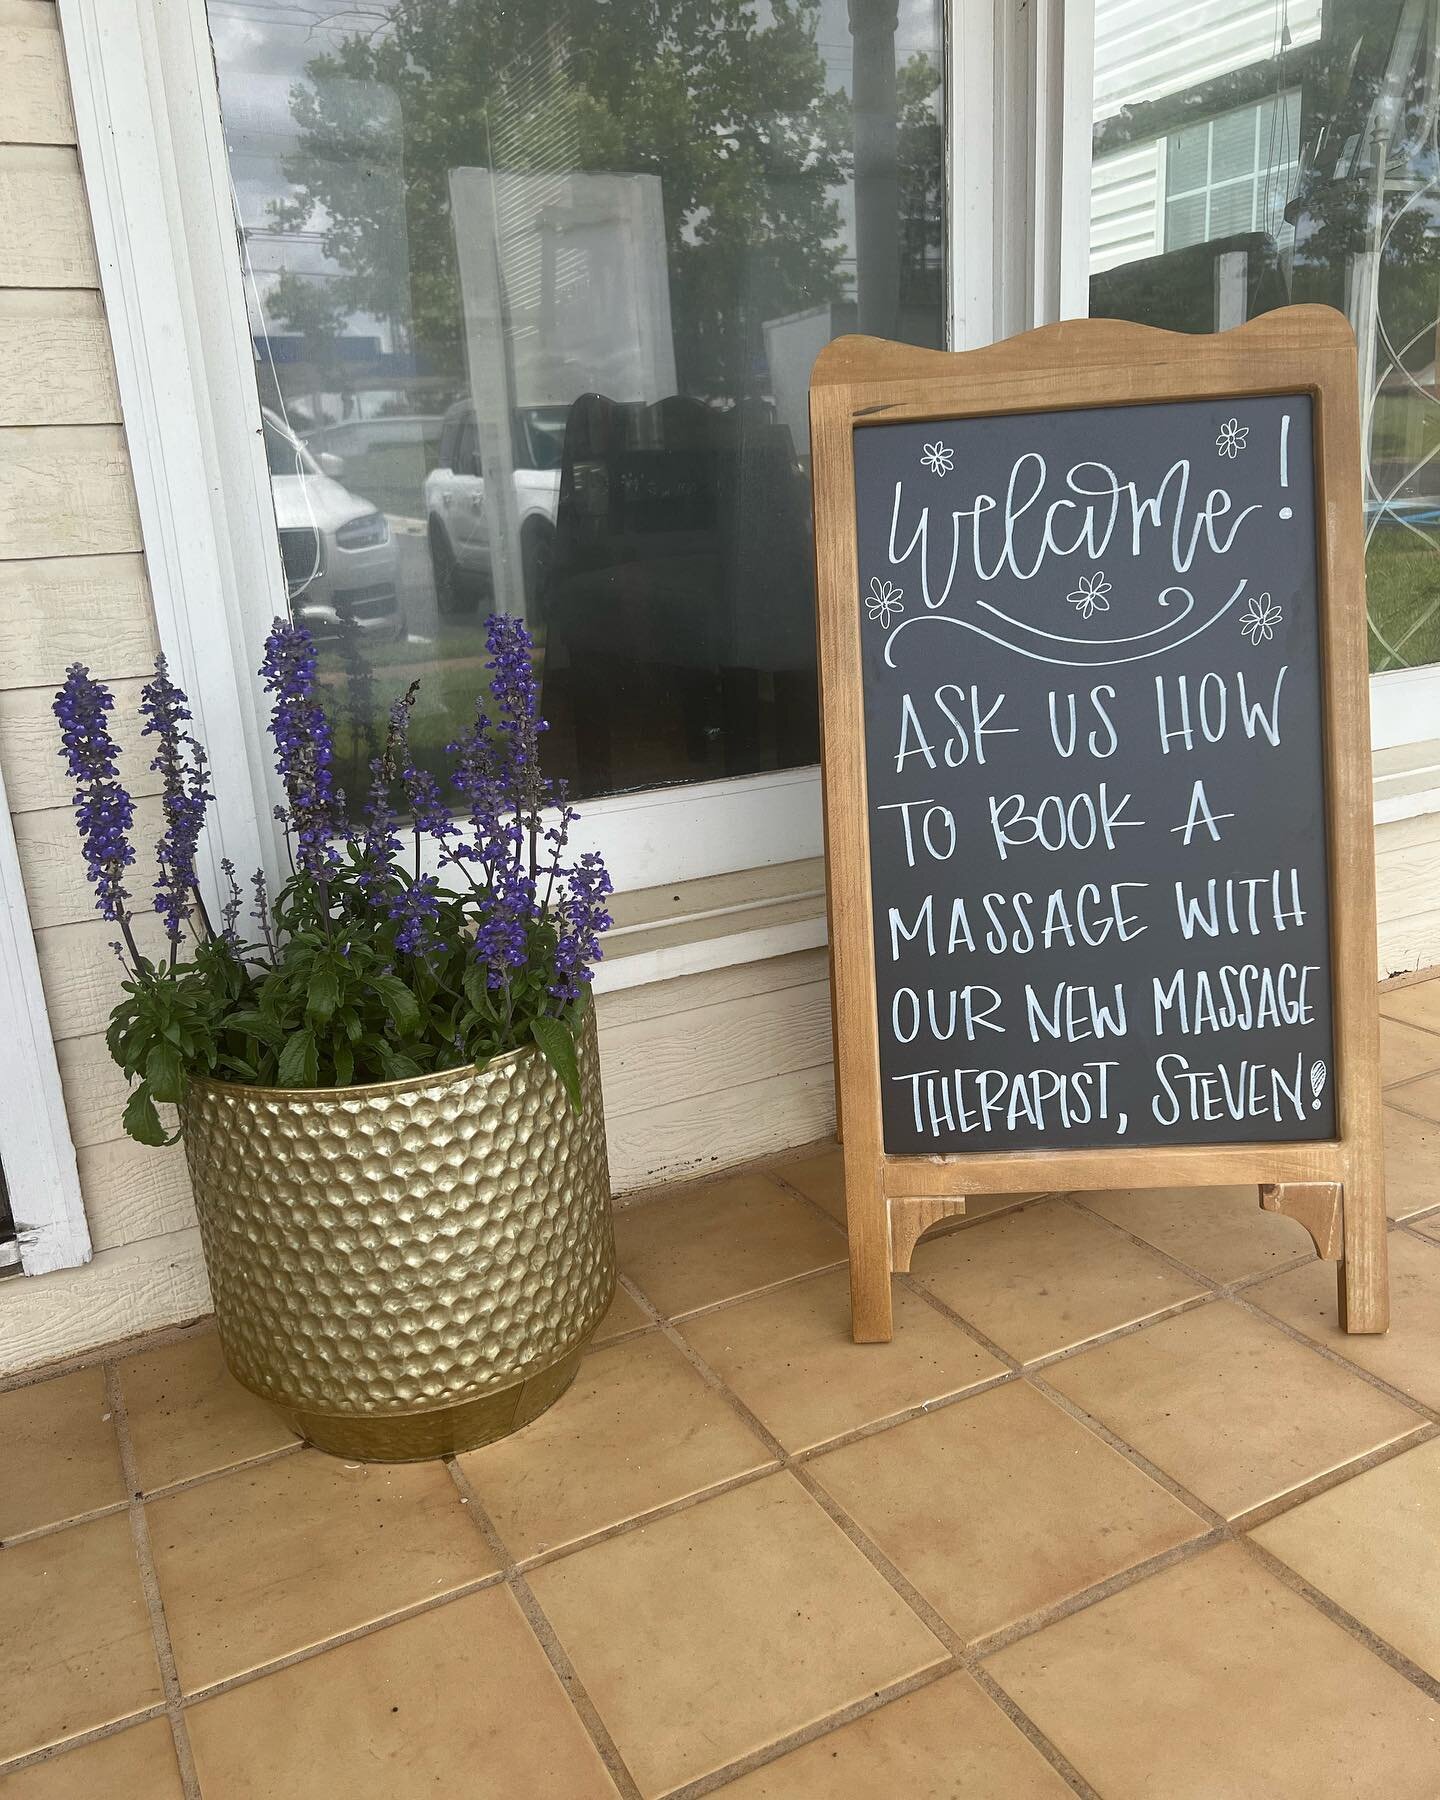 Massage appointments available with Steven click the link below to book

Book Online 24/7 at https://squareup.com/appointments/book/un2gmn1sd1cpa1/CG9RSJNSYTW8T/services

#massage #massagetherapy #massagedothan #prenatalmassage #prenatalmassagedothan